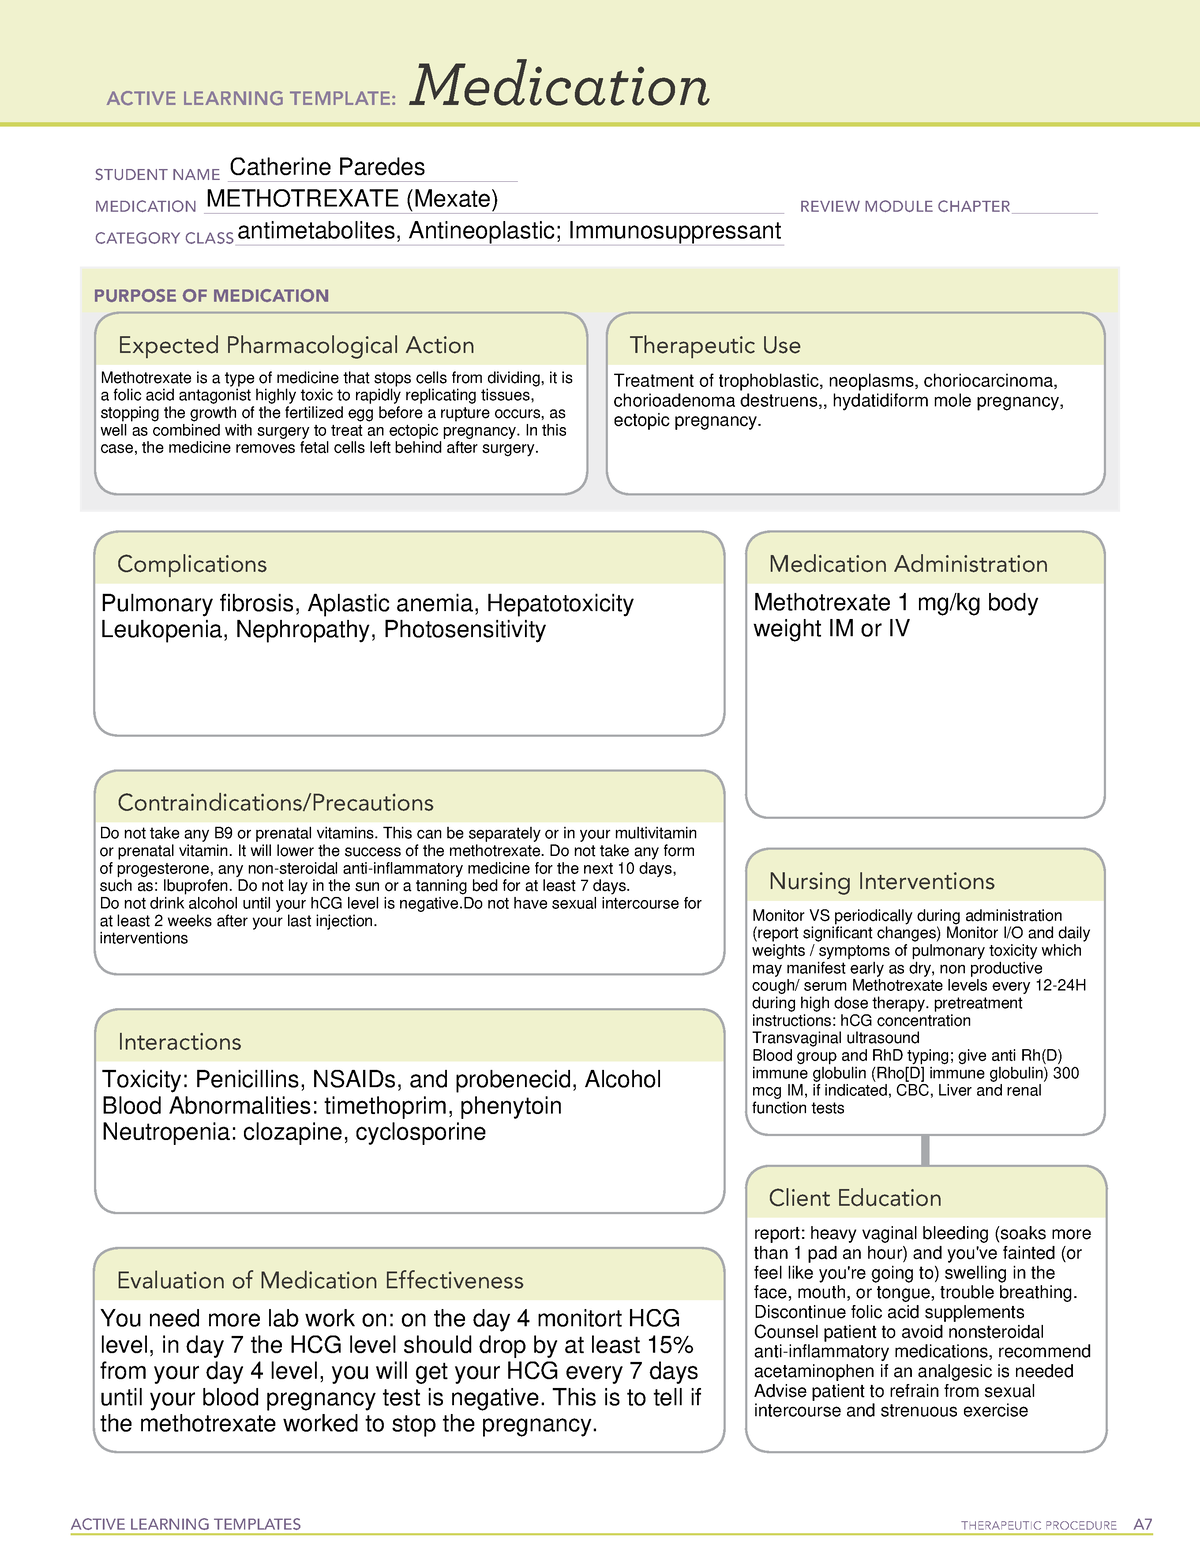 Methotrexate ati template ACTIVE LEARNING TEMPLATES THERAPEUTIC